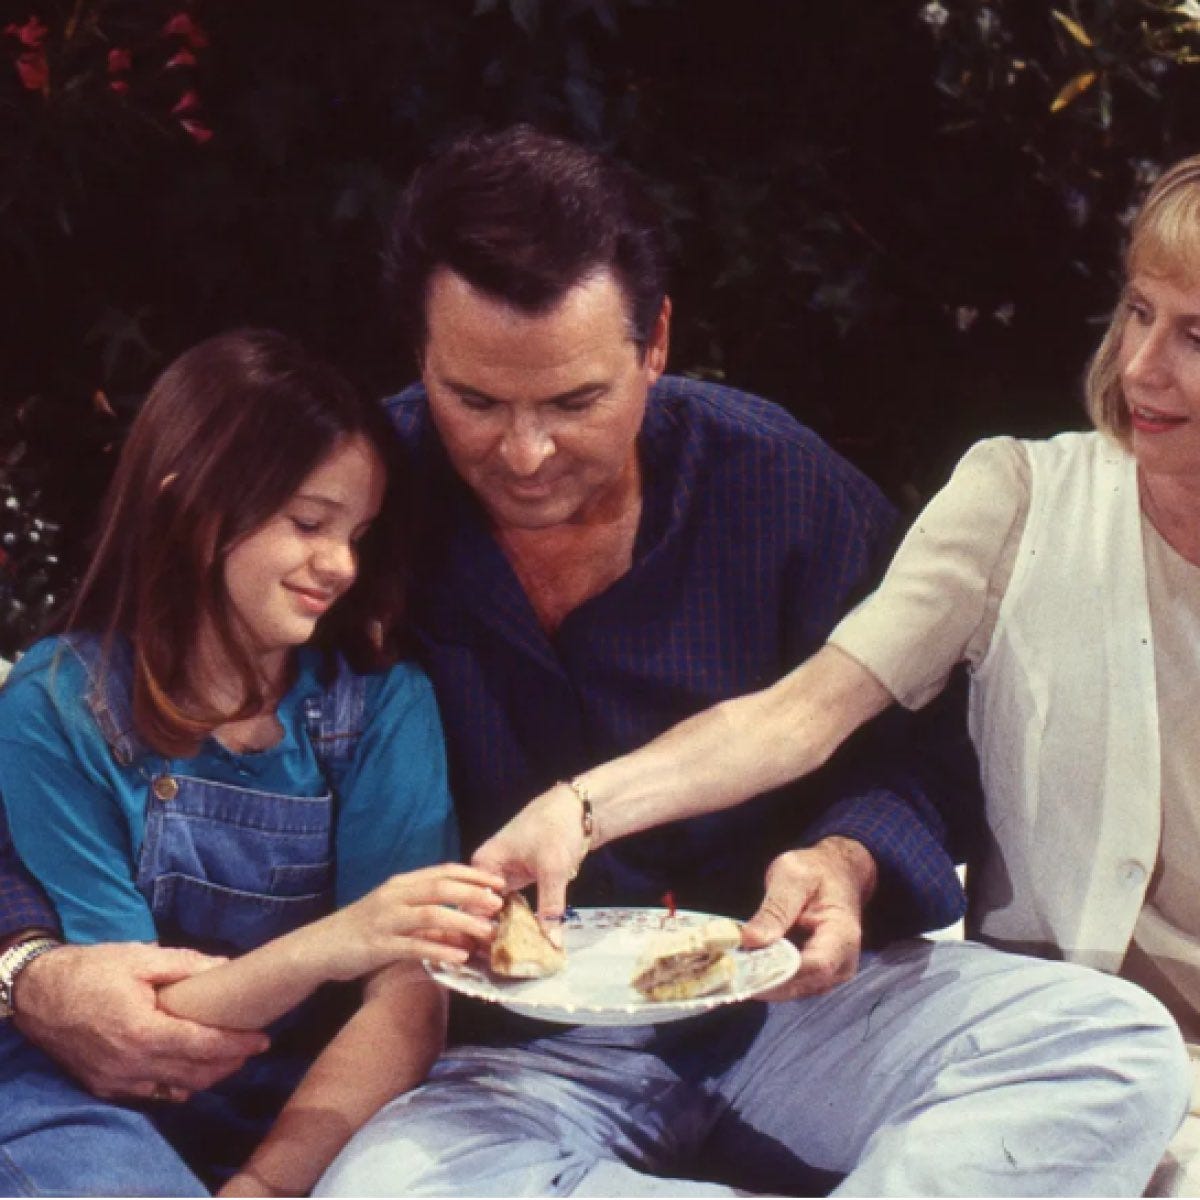 A still from "General Hospital." A very young Emily Quartermaine (Amber Tamblyn), Dr. Alan Quartermaine (Stuart Damon), and Dr. Monica Quartermaine (Leslie Charleson) sit outside sharing a sandwich together.